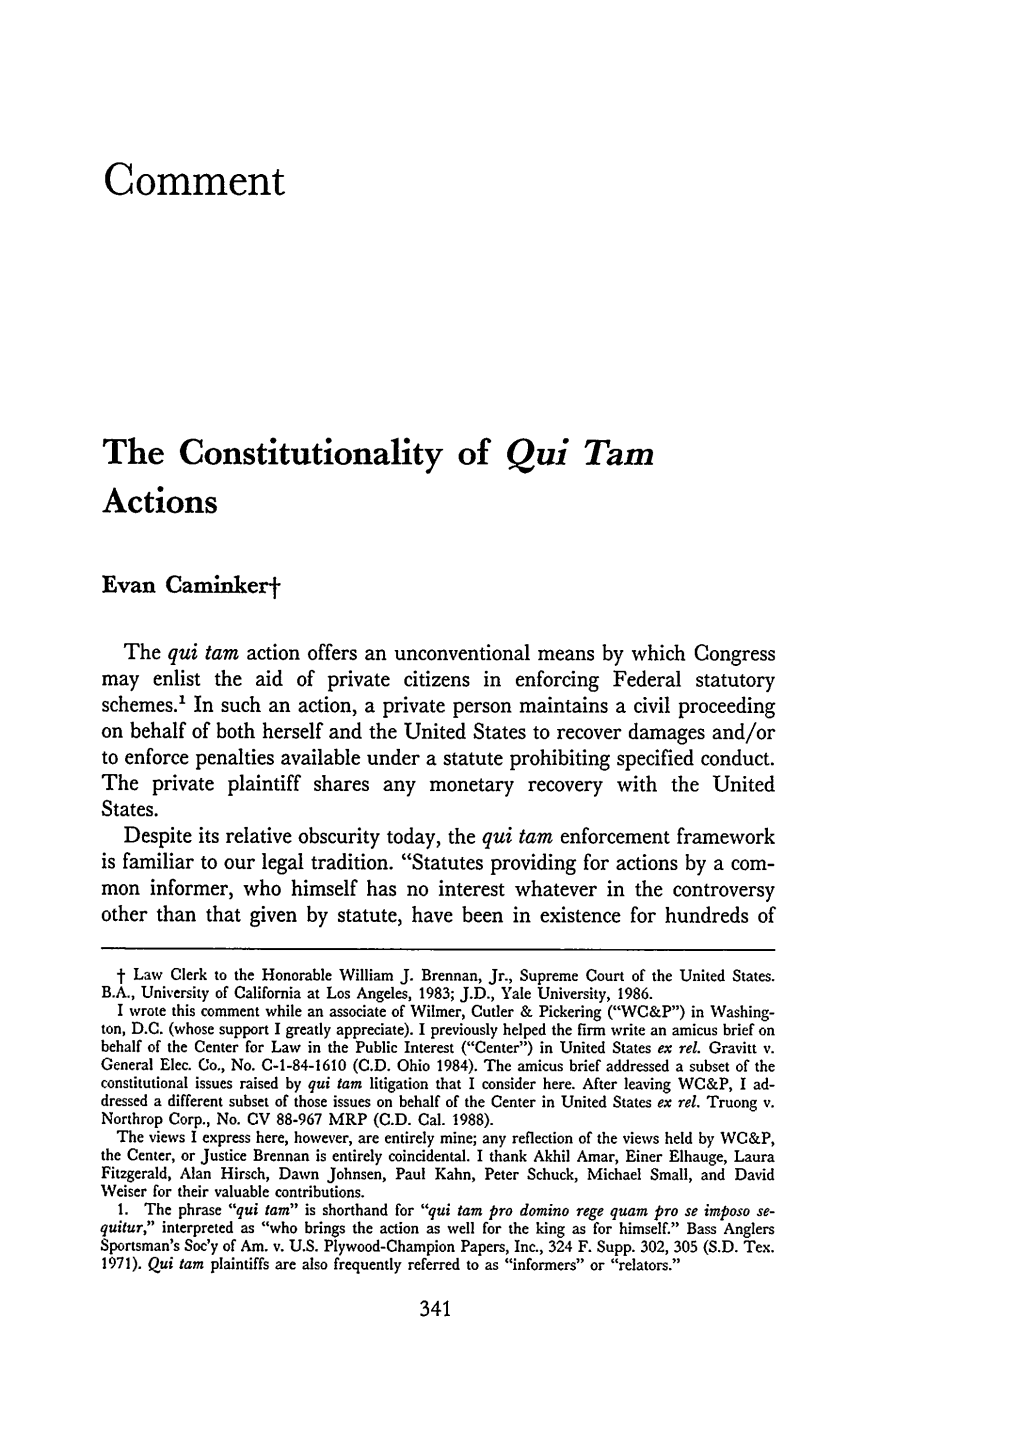 The Constitutionality of Qui Tam Actions